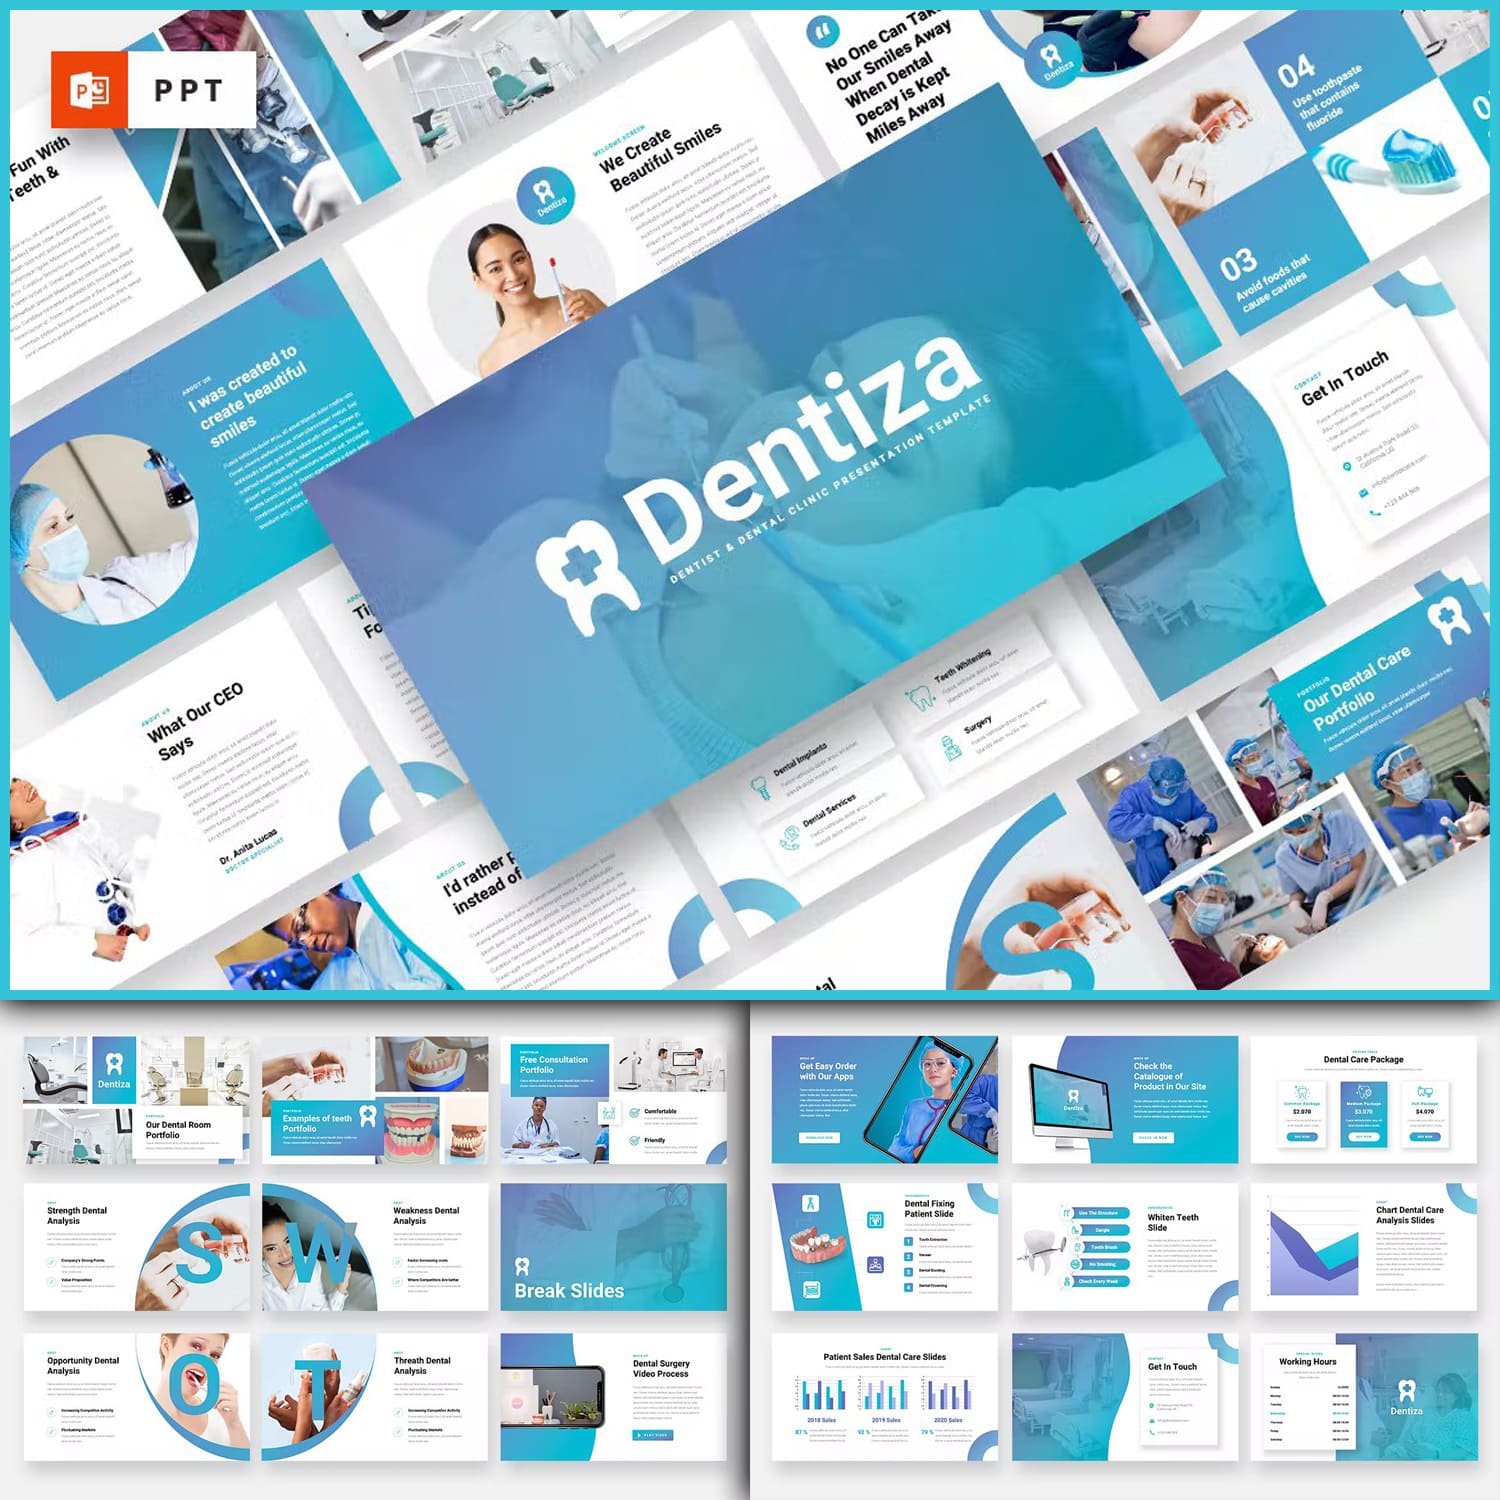 A set of images of amazing presentation template slides on the topic of dentistry.